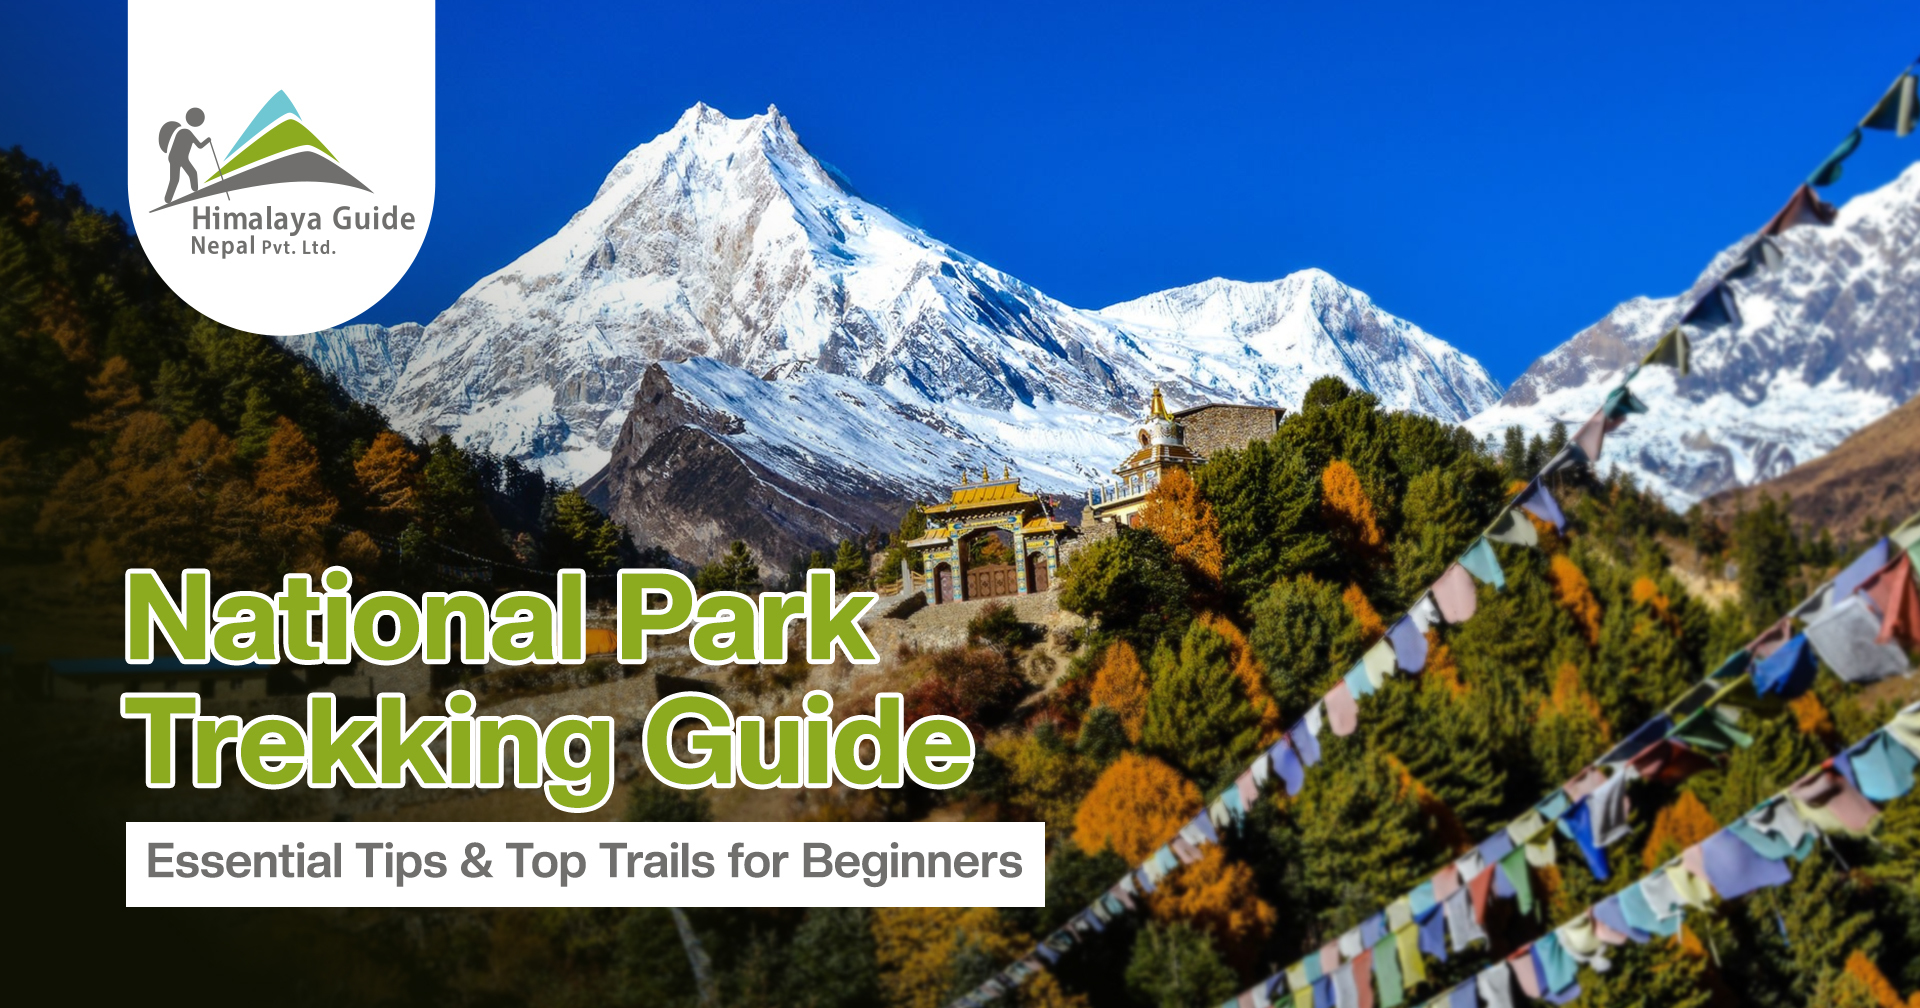 National Park Trekking Guide: Essential Tips & Top Trails for Beginners